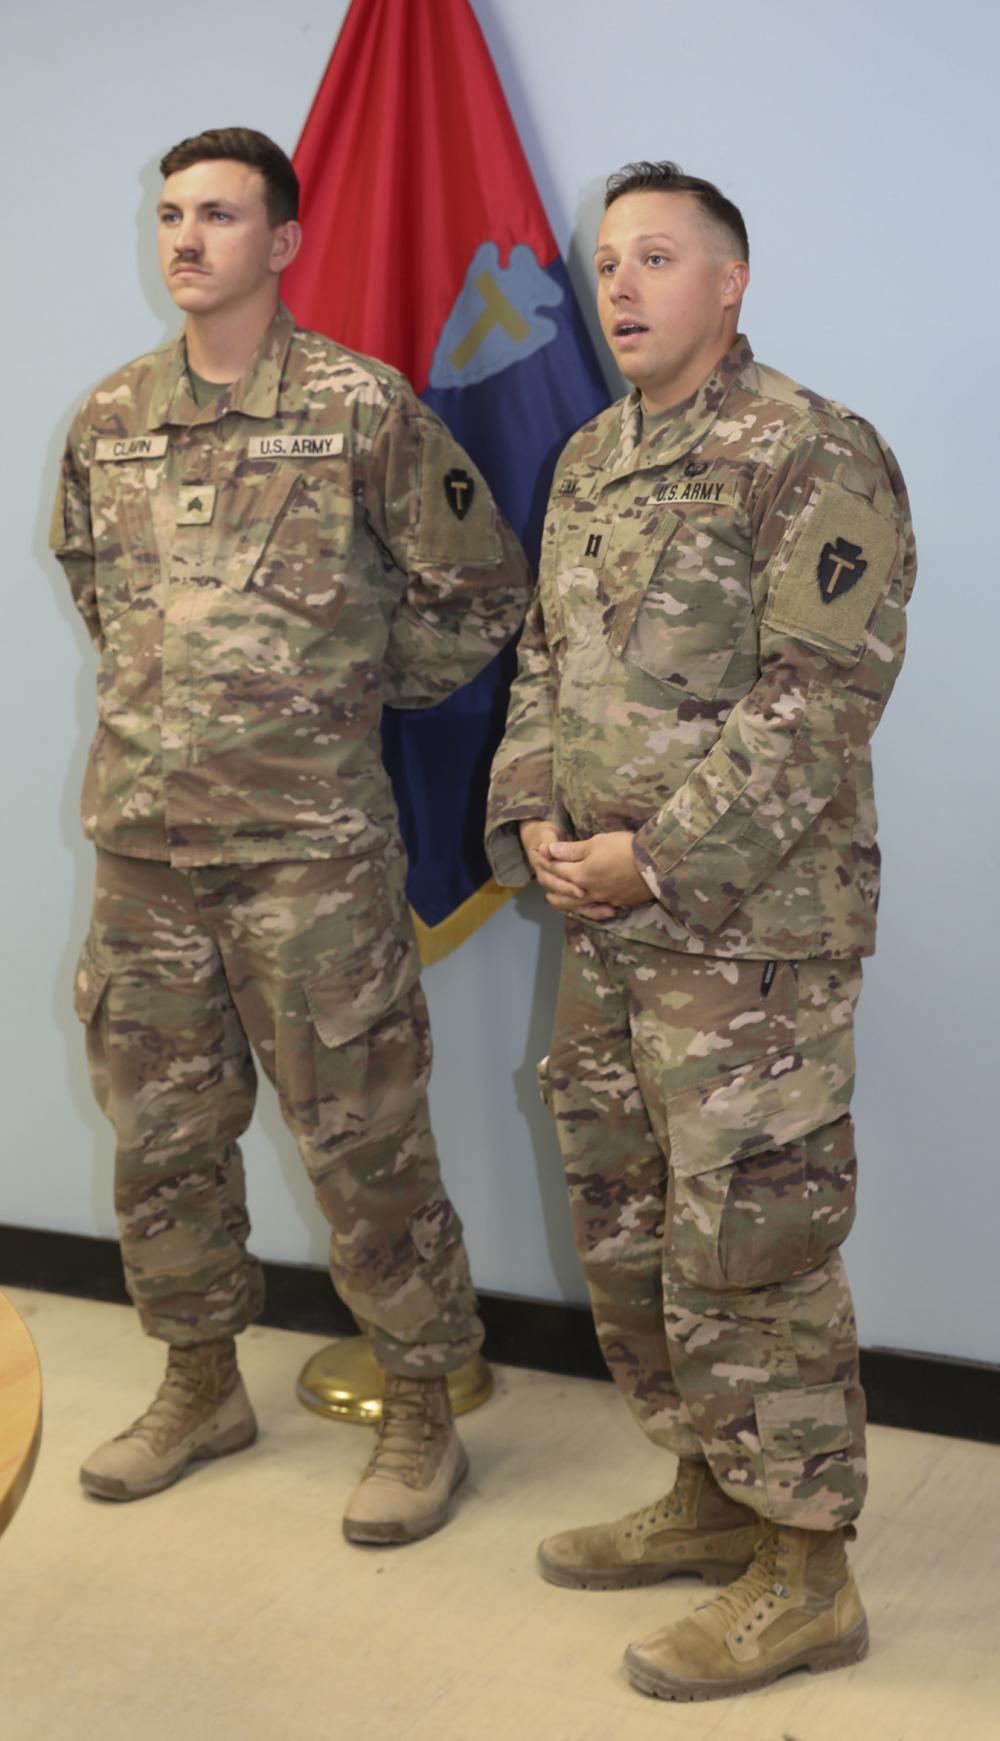 Task Force Roosevelt Soldier recognized as CJTF-OIR &quot;Hero of the Week&quot;